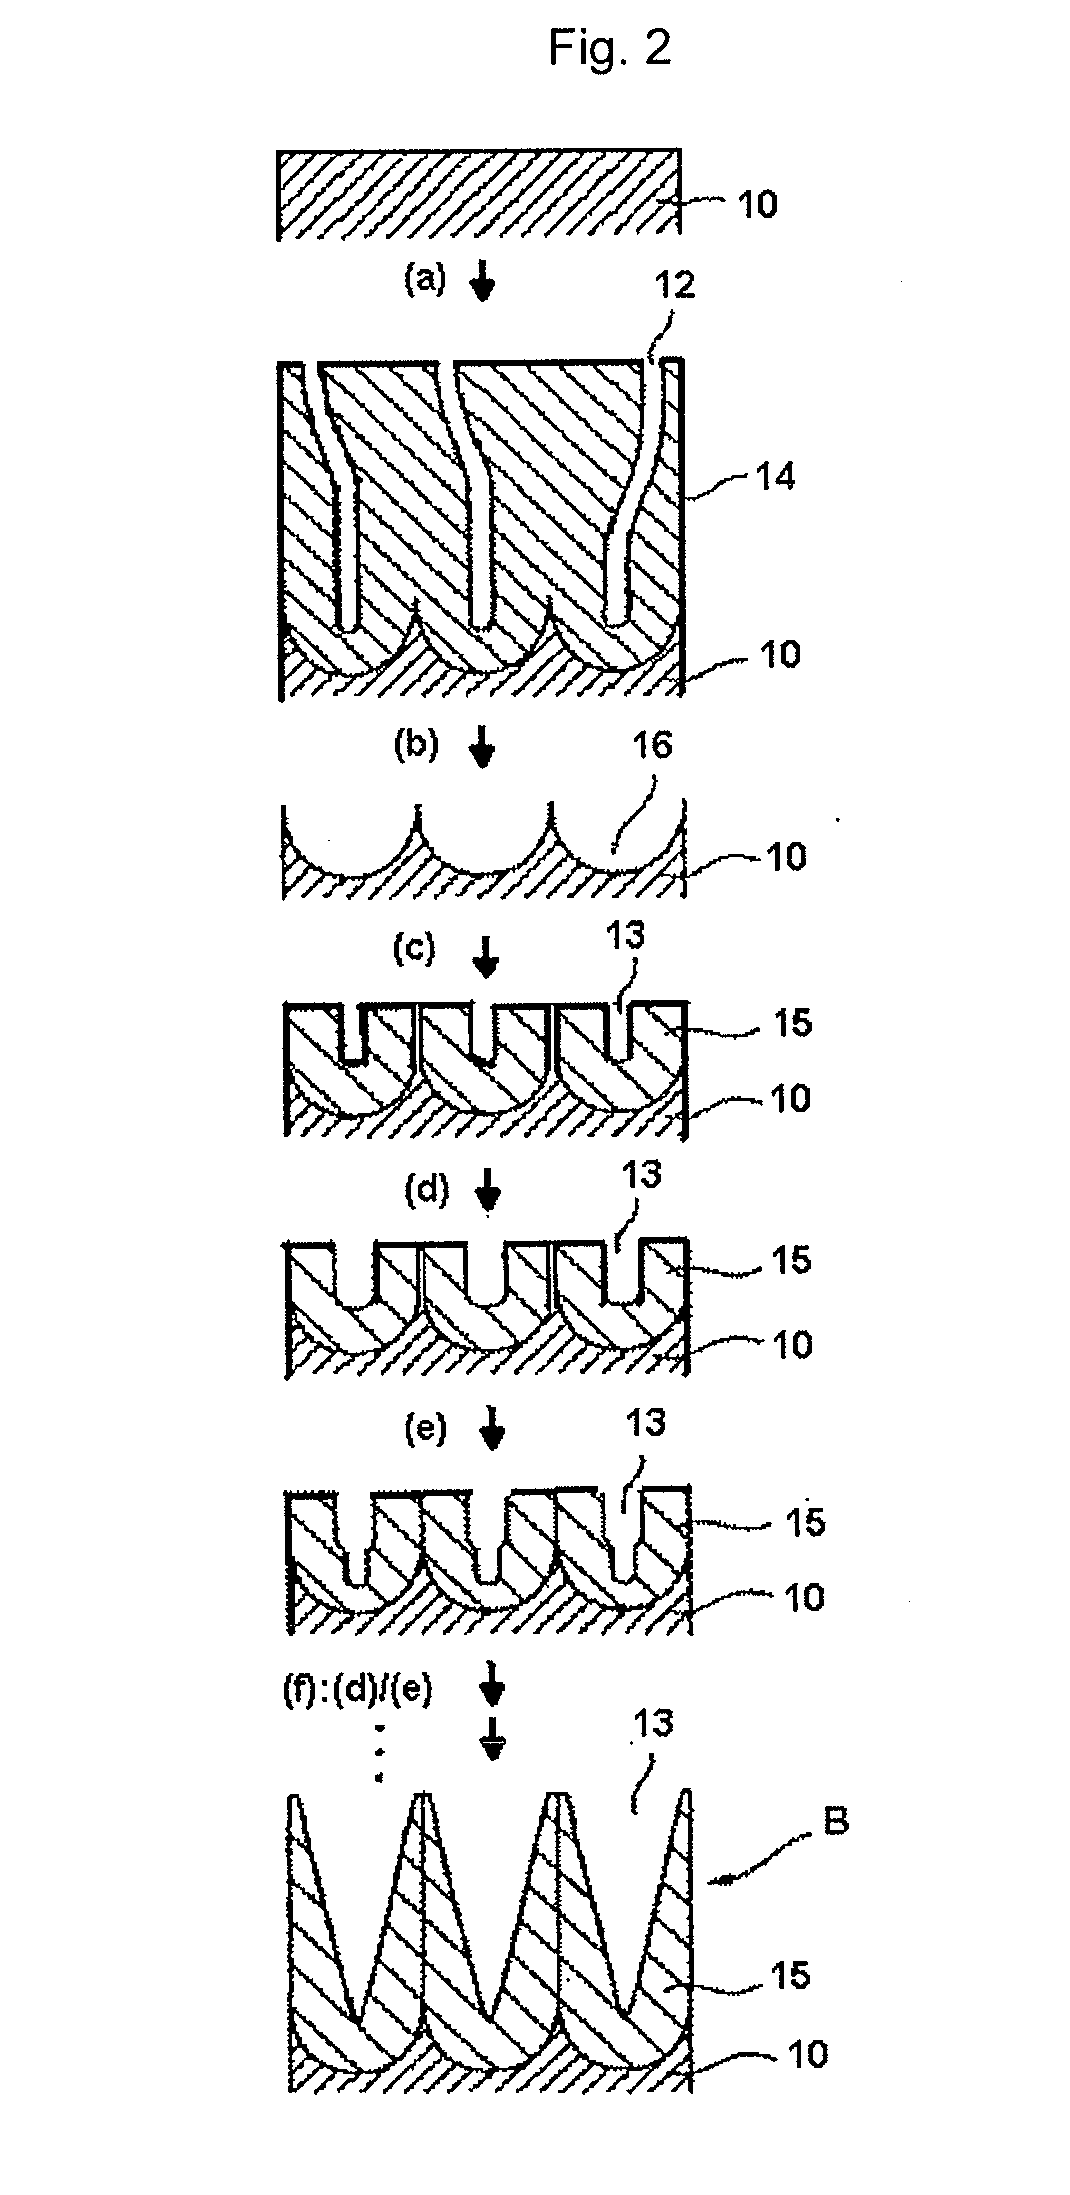 Active energy ray-curable resin composition, product having the uneven microstructure, and method for producing product having the uneven microstructure